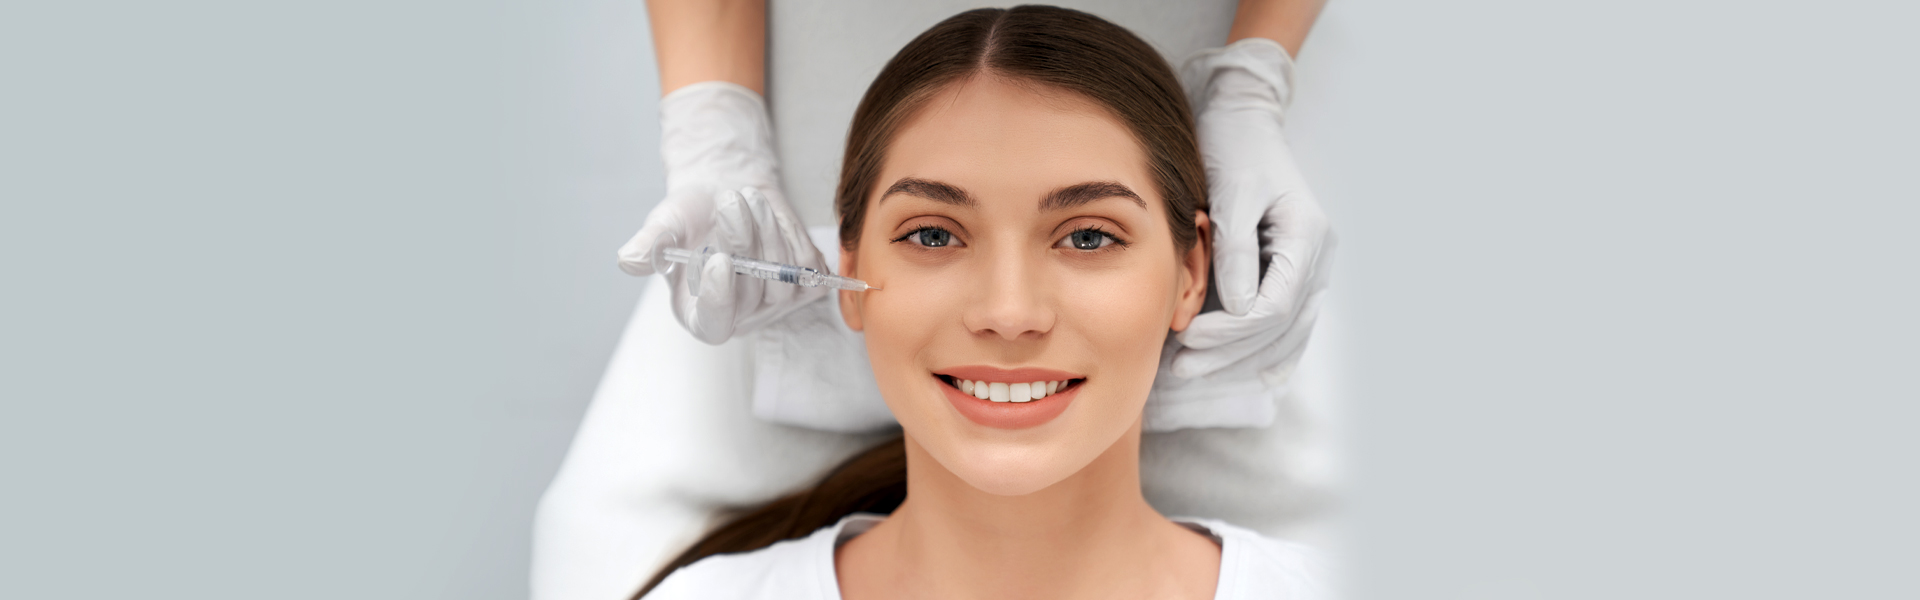 How Long Does Botox Take to Work for TMJ?